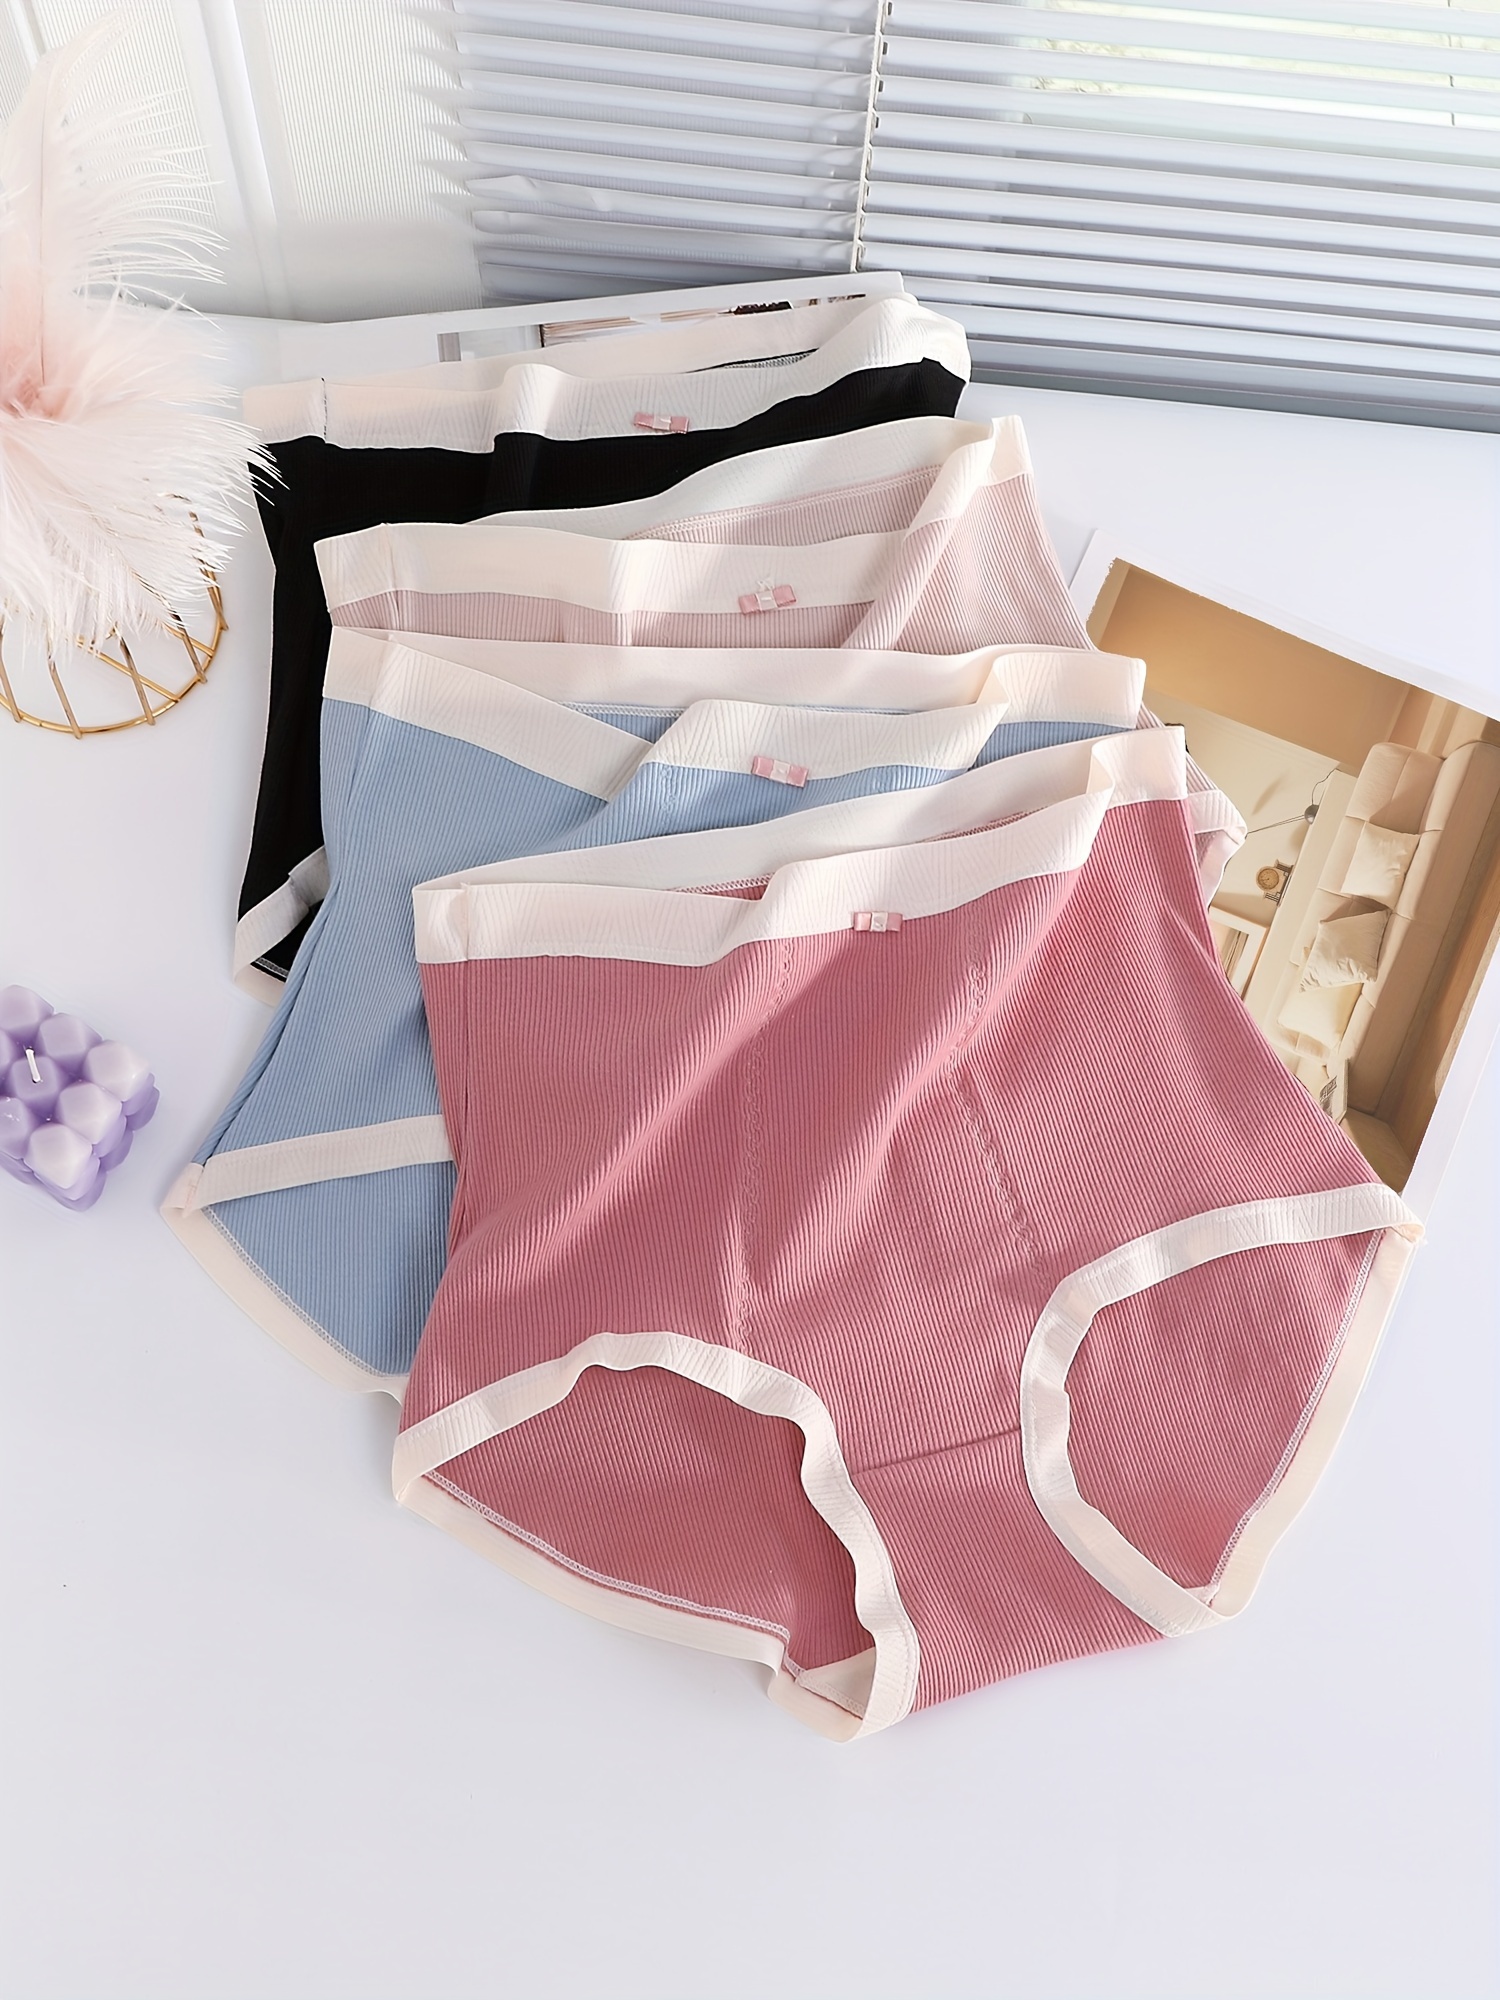 7Pcs Mix Color Cotton Panties Women Underwear Lovely Young Girls Panty  Breathable Briefs Sexy Ladies Underpants Female Lingerie